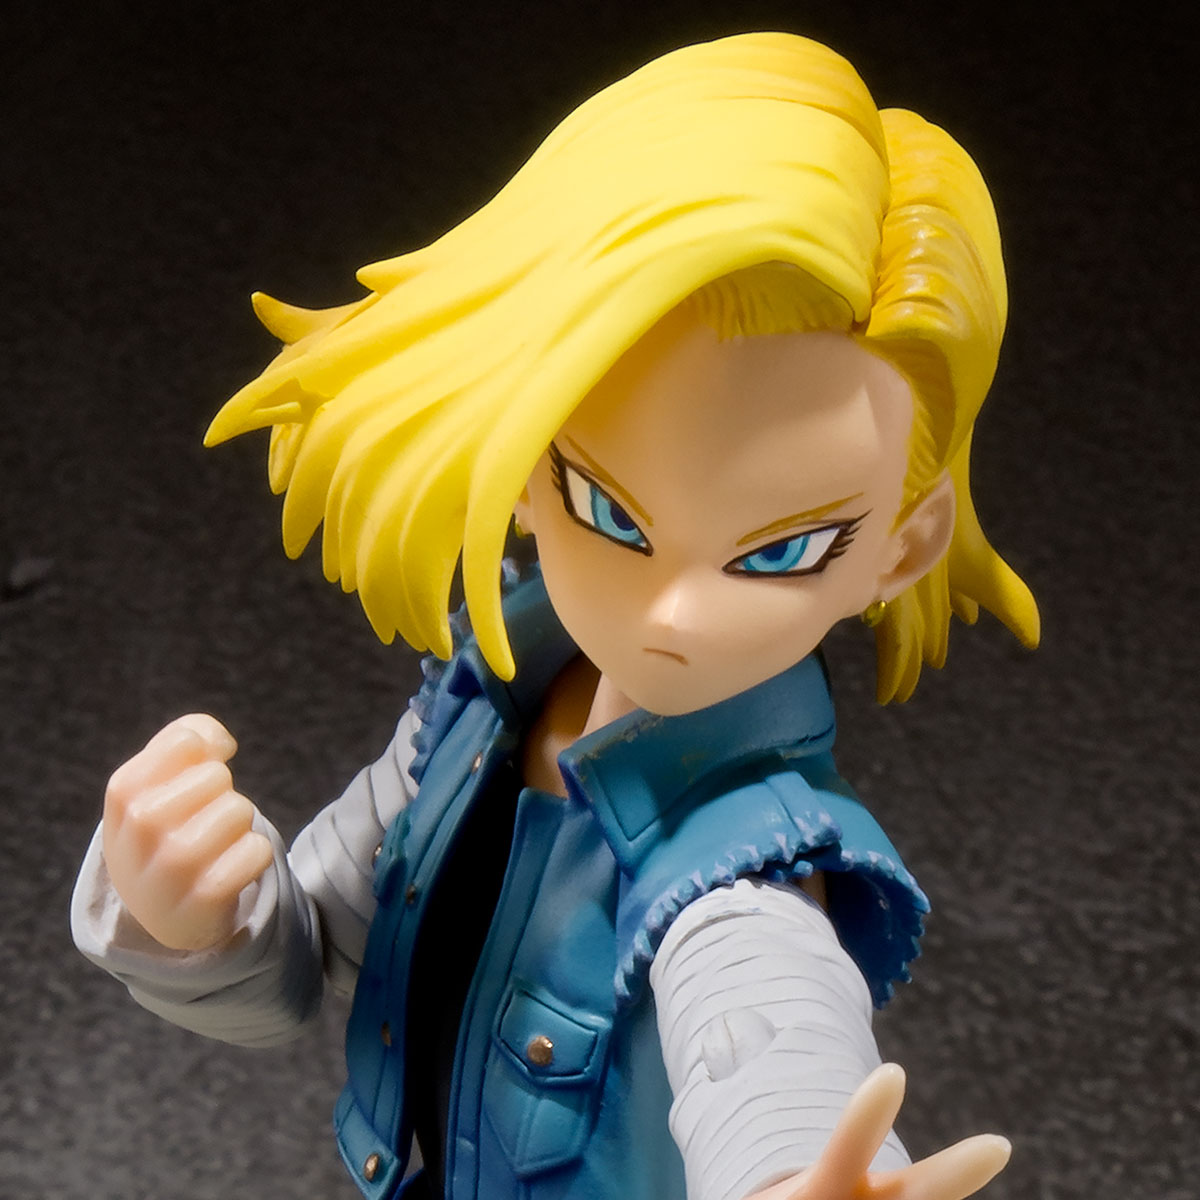 S.H.Figuarts ANDROID 18 -Event Exclusive Color Edition- | DRAGON BALL | PREMIUM BANDAI USA Online for Action Figures, Model Kits, Toys and more